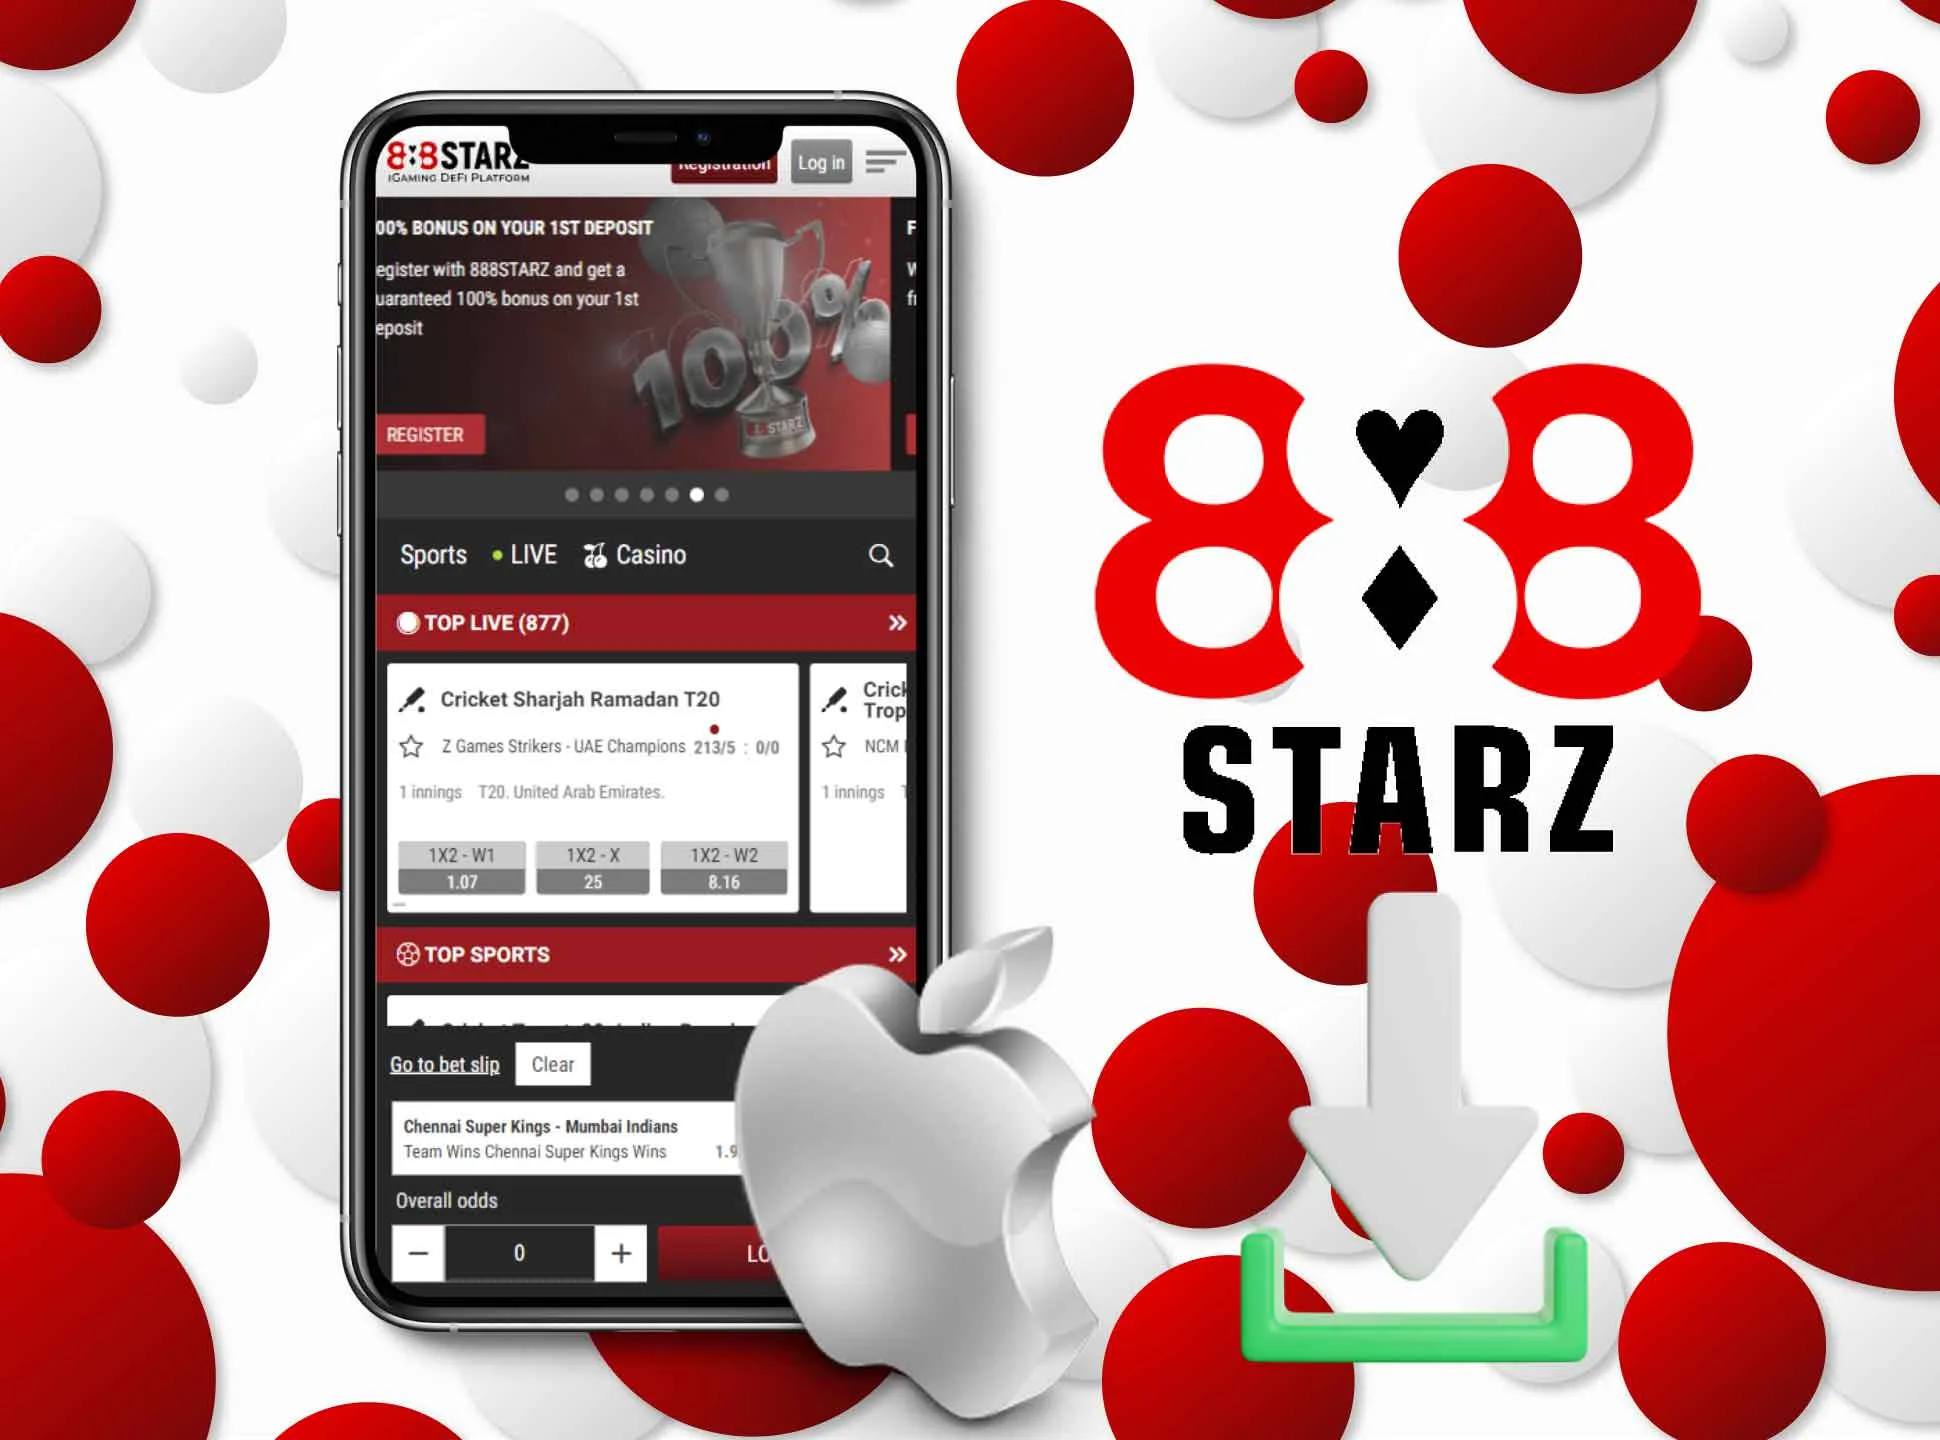 Install the 888starz app on your iPhone and start placing bets.